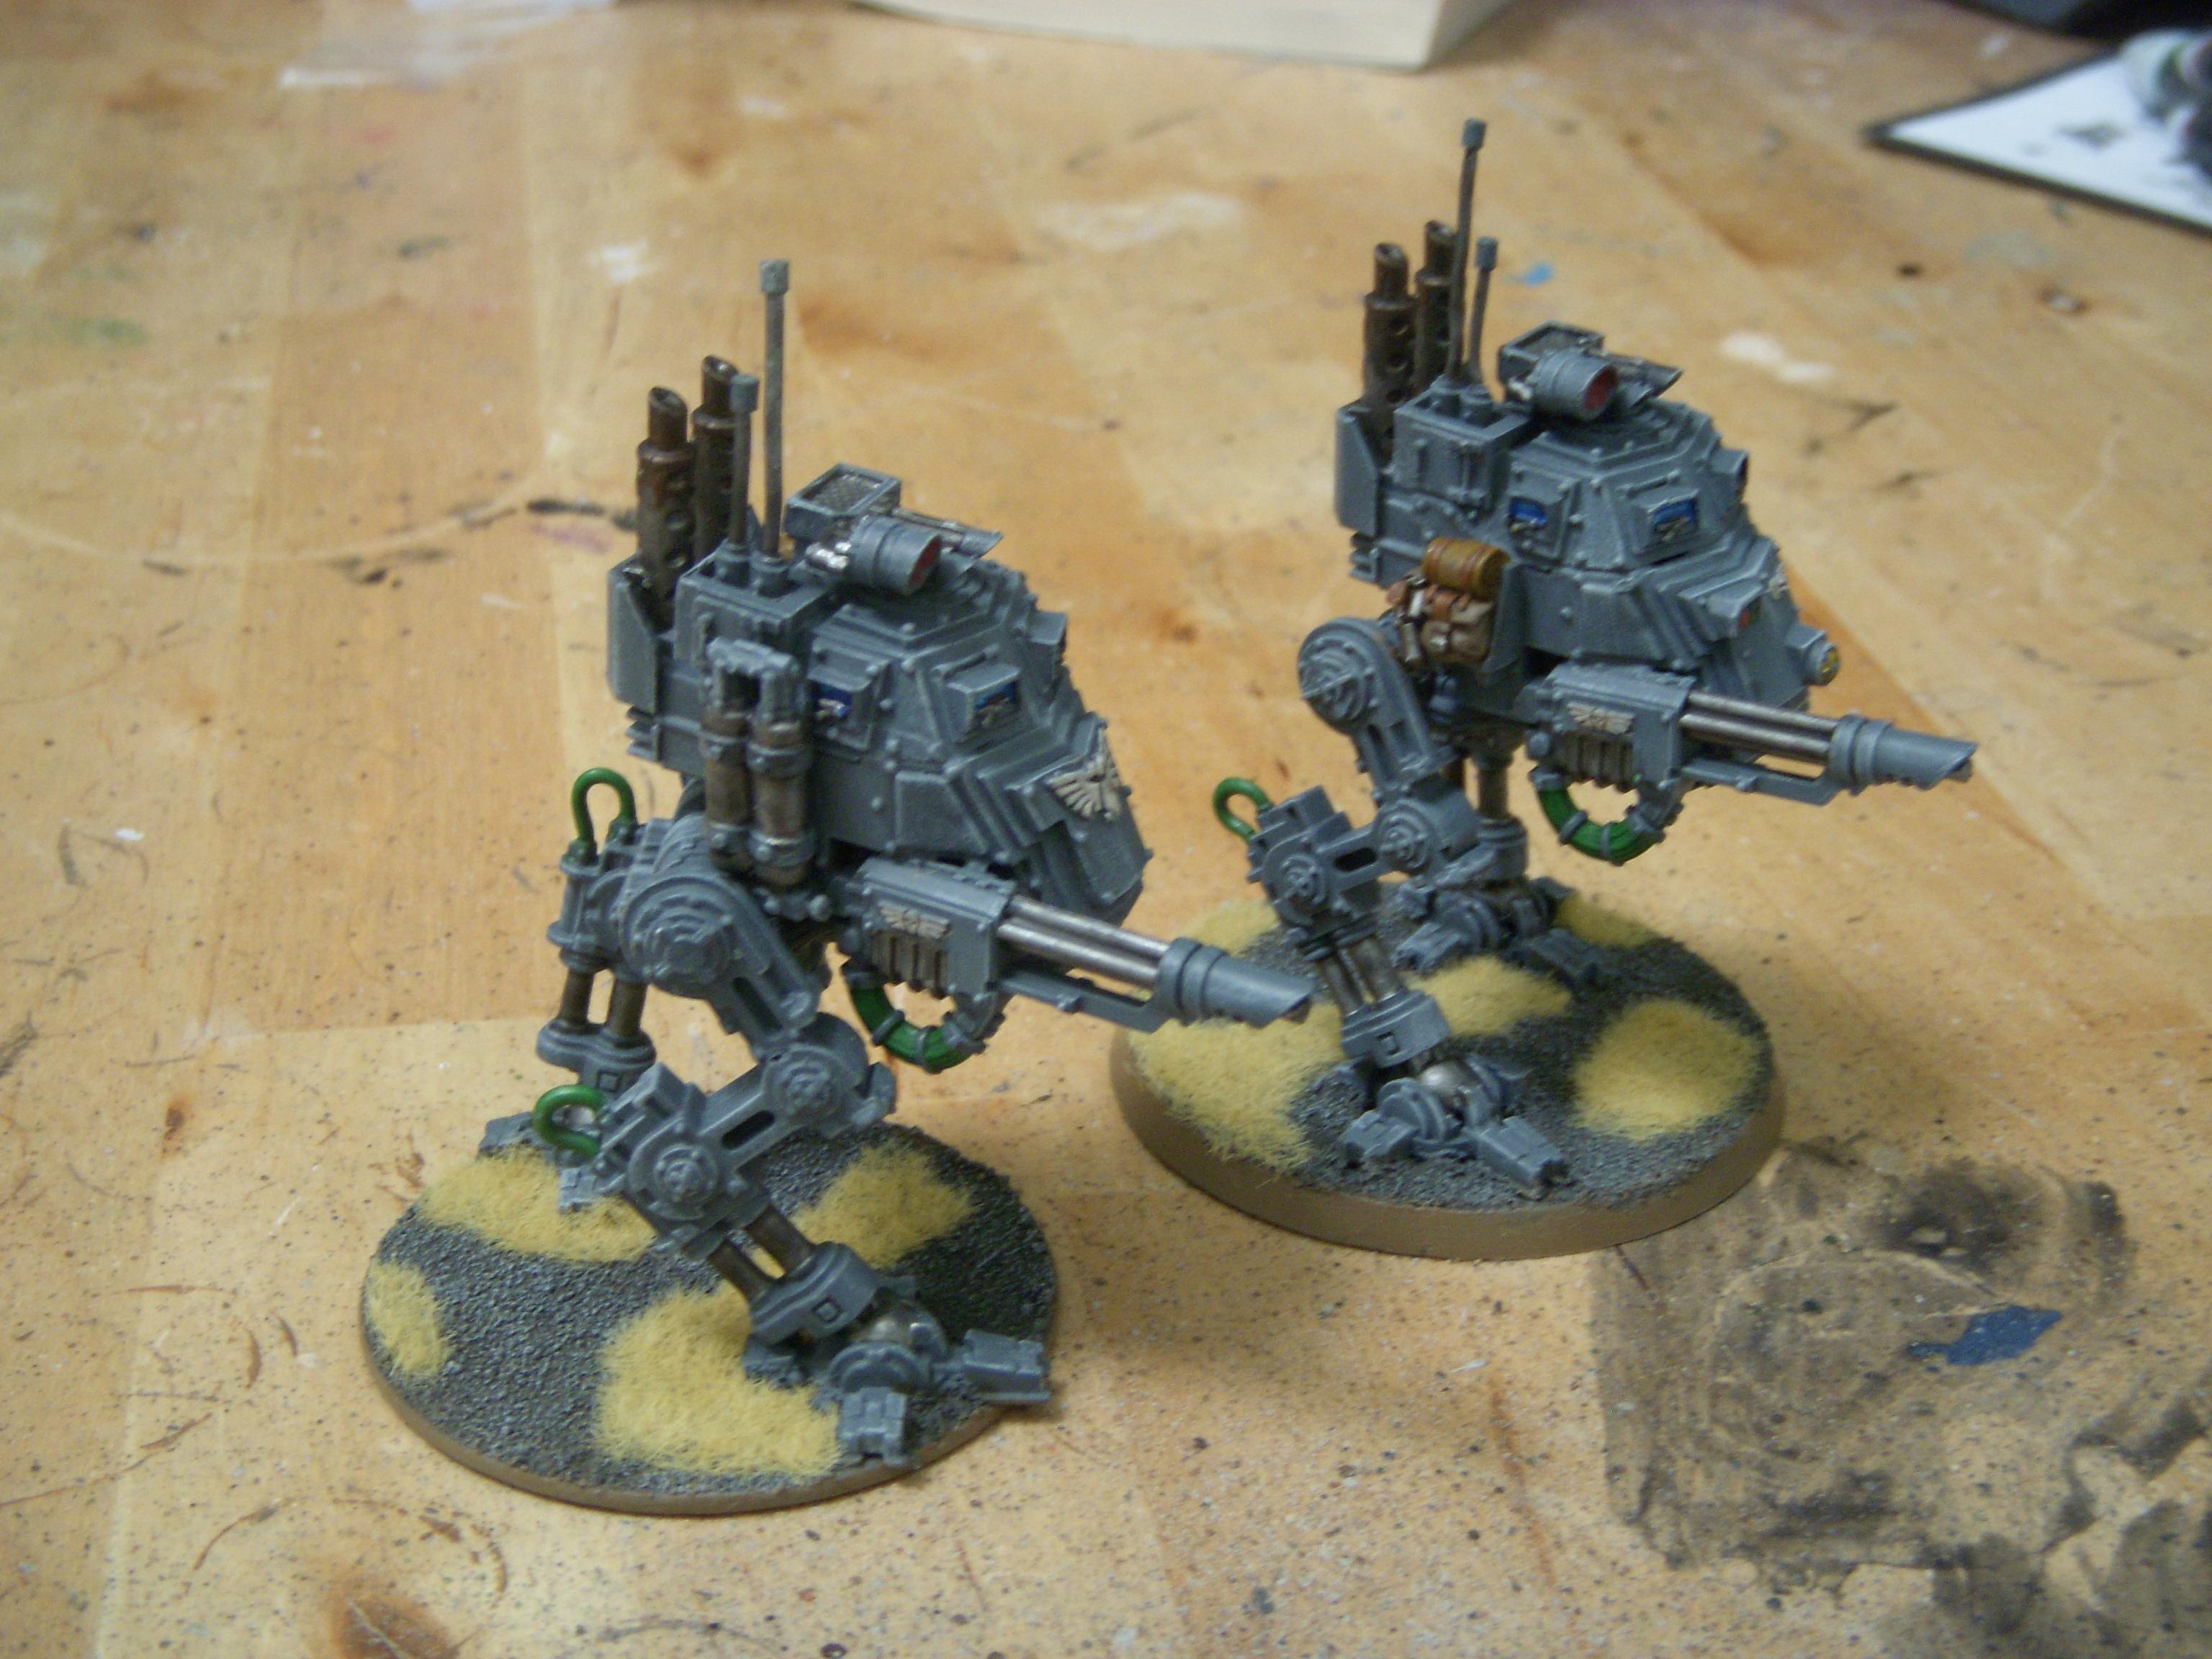 Bad Moon Orks, Imperial Guard Mordian Iron Guard Bad Moon Orks, Mordian Imperial Guard, Setinel